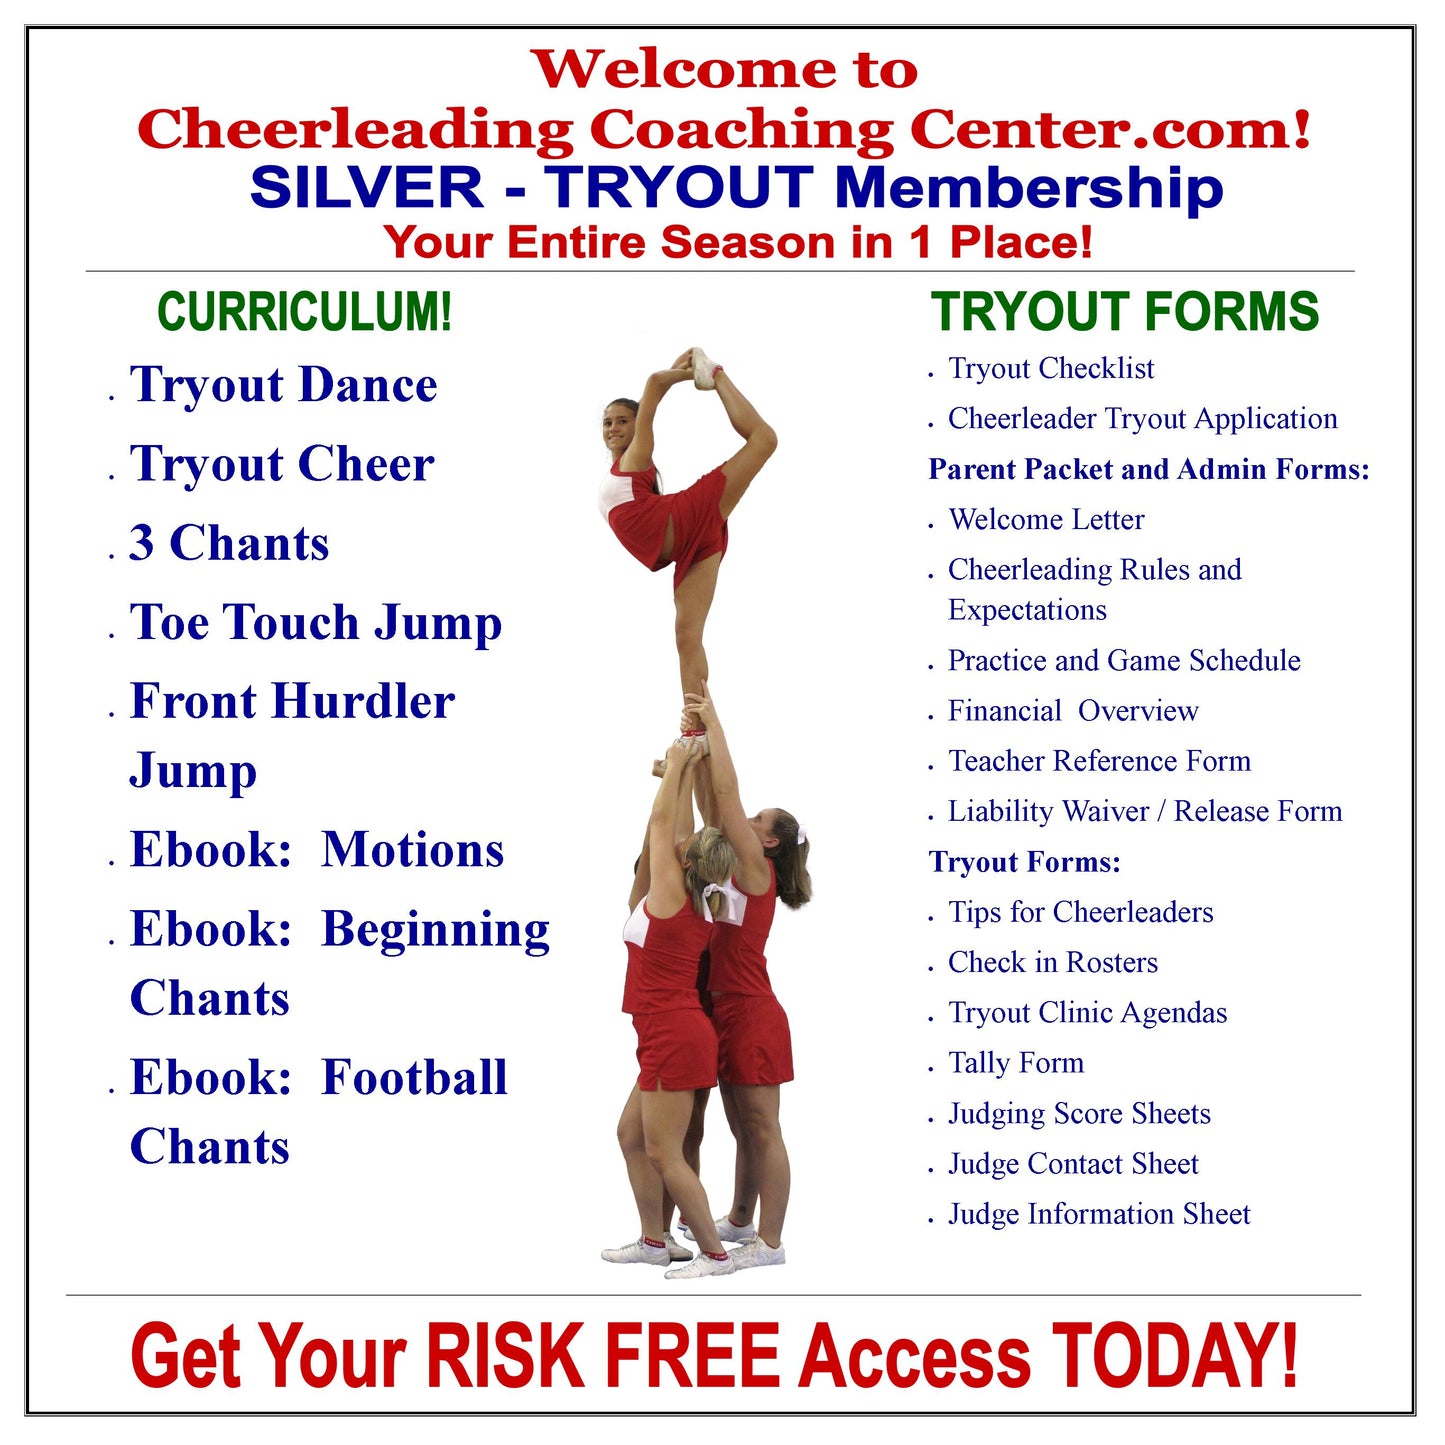 Cheerleading Coaching Center SILVER - TRYOUT Membership - Cheer and Dance On Demand